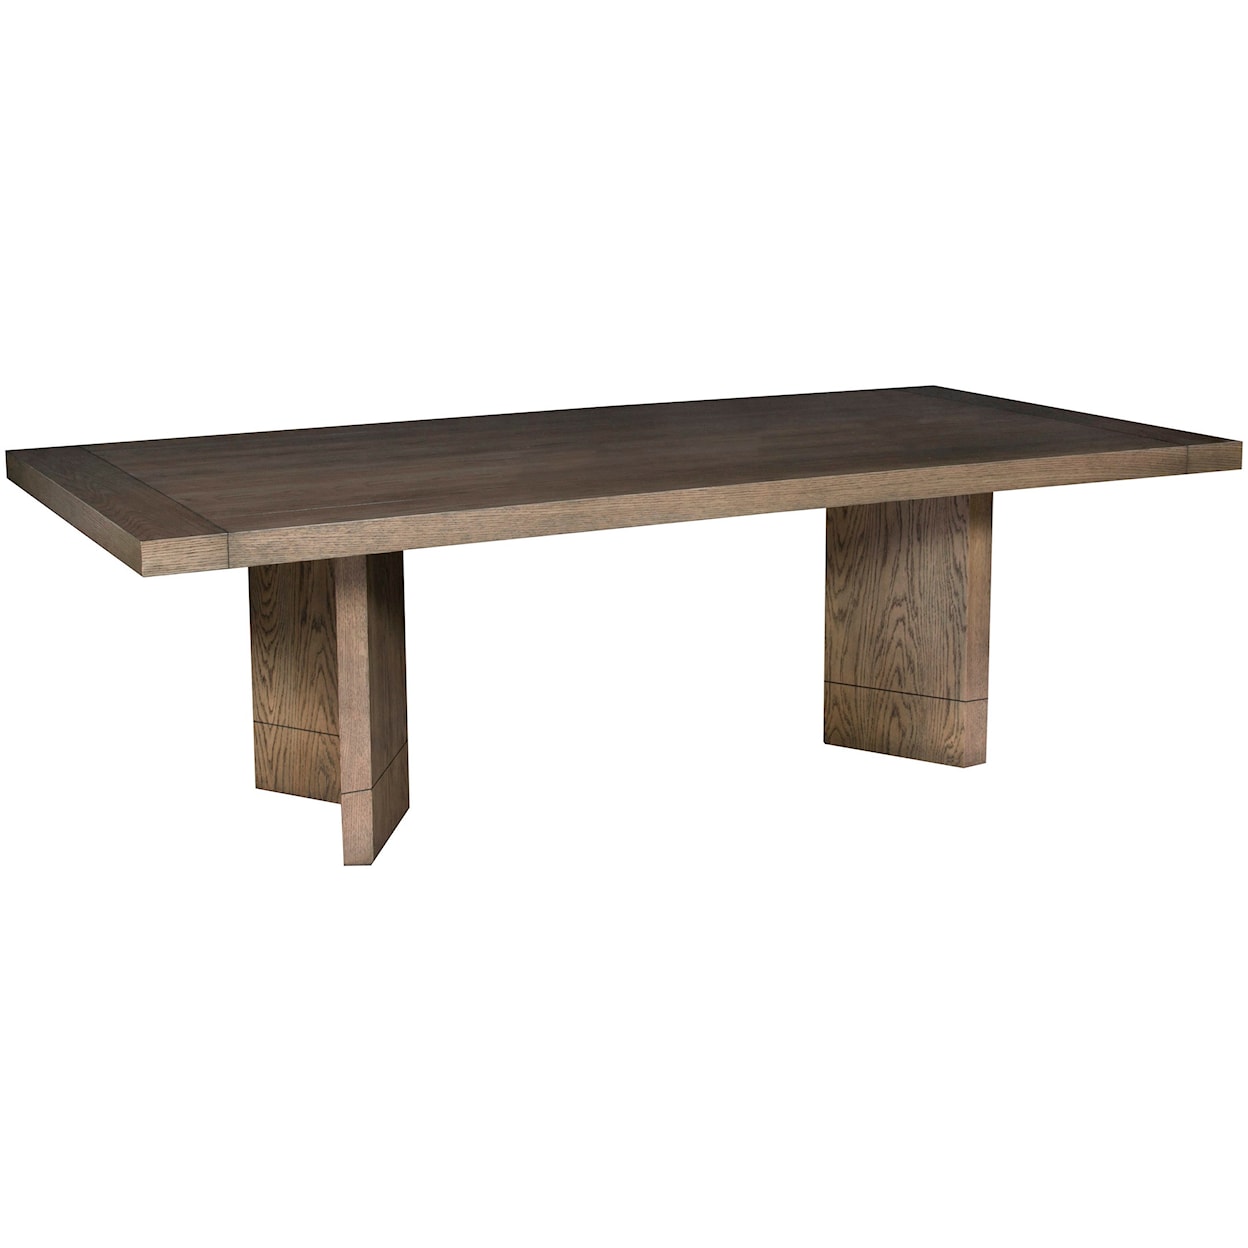 Vanguard Furniture Schiller by Thom Filicia Home Dining Table